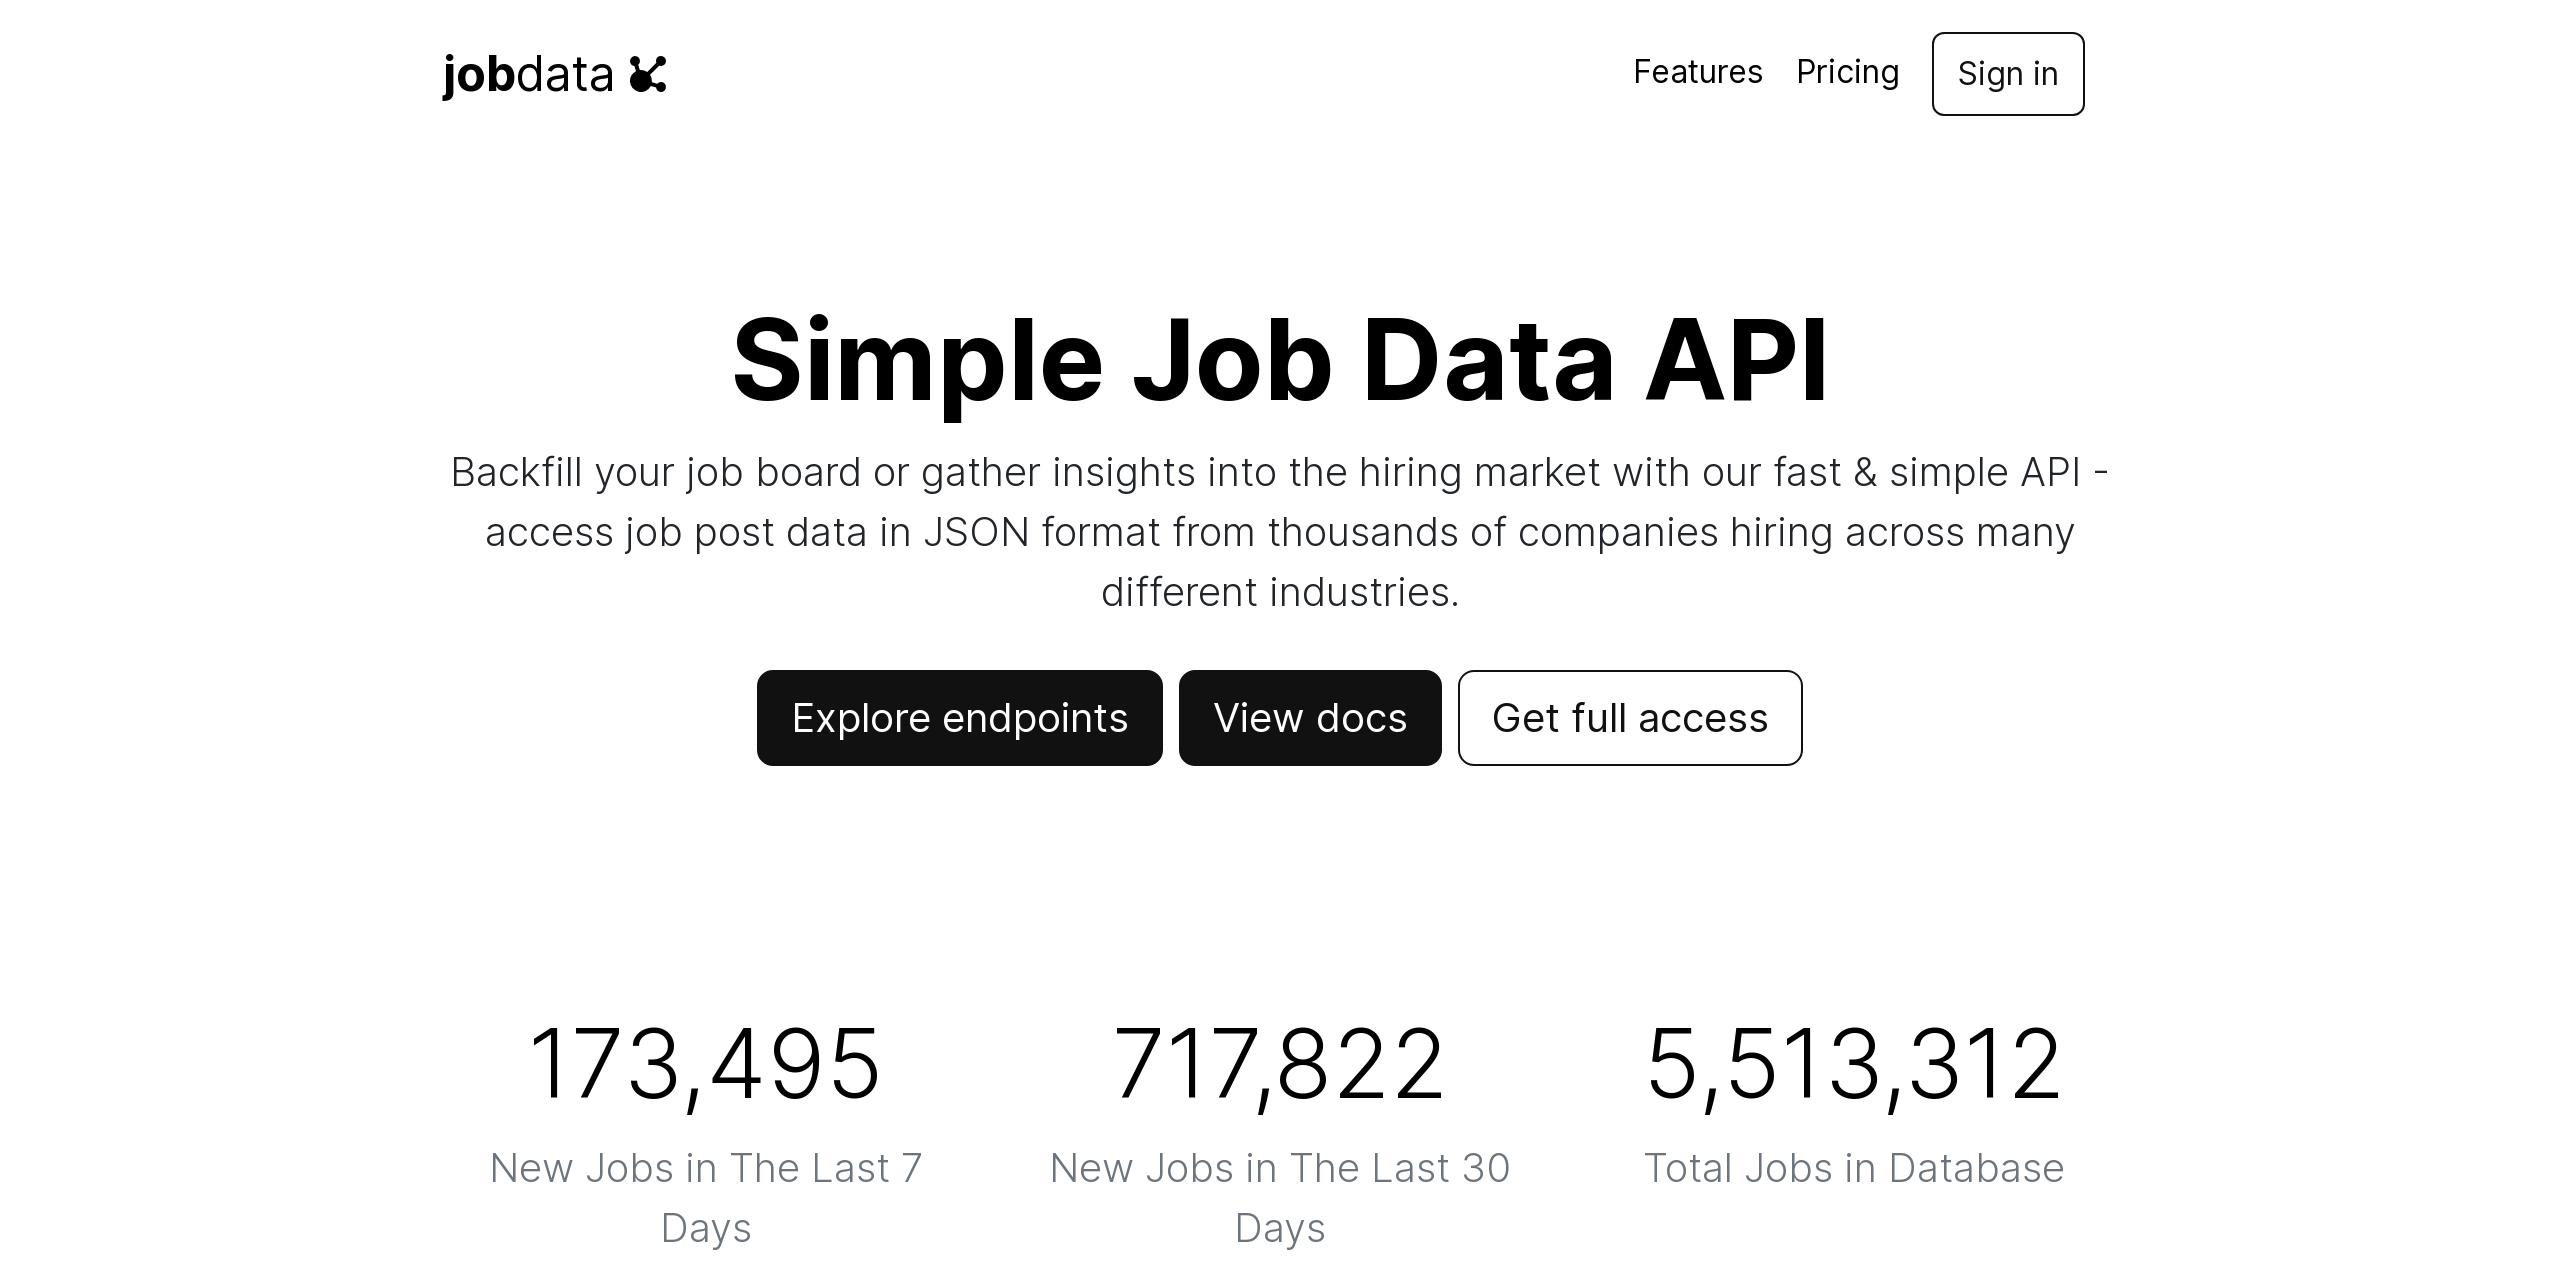 Backfill your job board or gather insights into the hiring market with our fast & simple API - access job post data in JSON format from thousands 